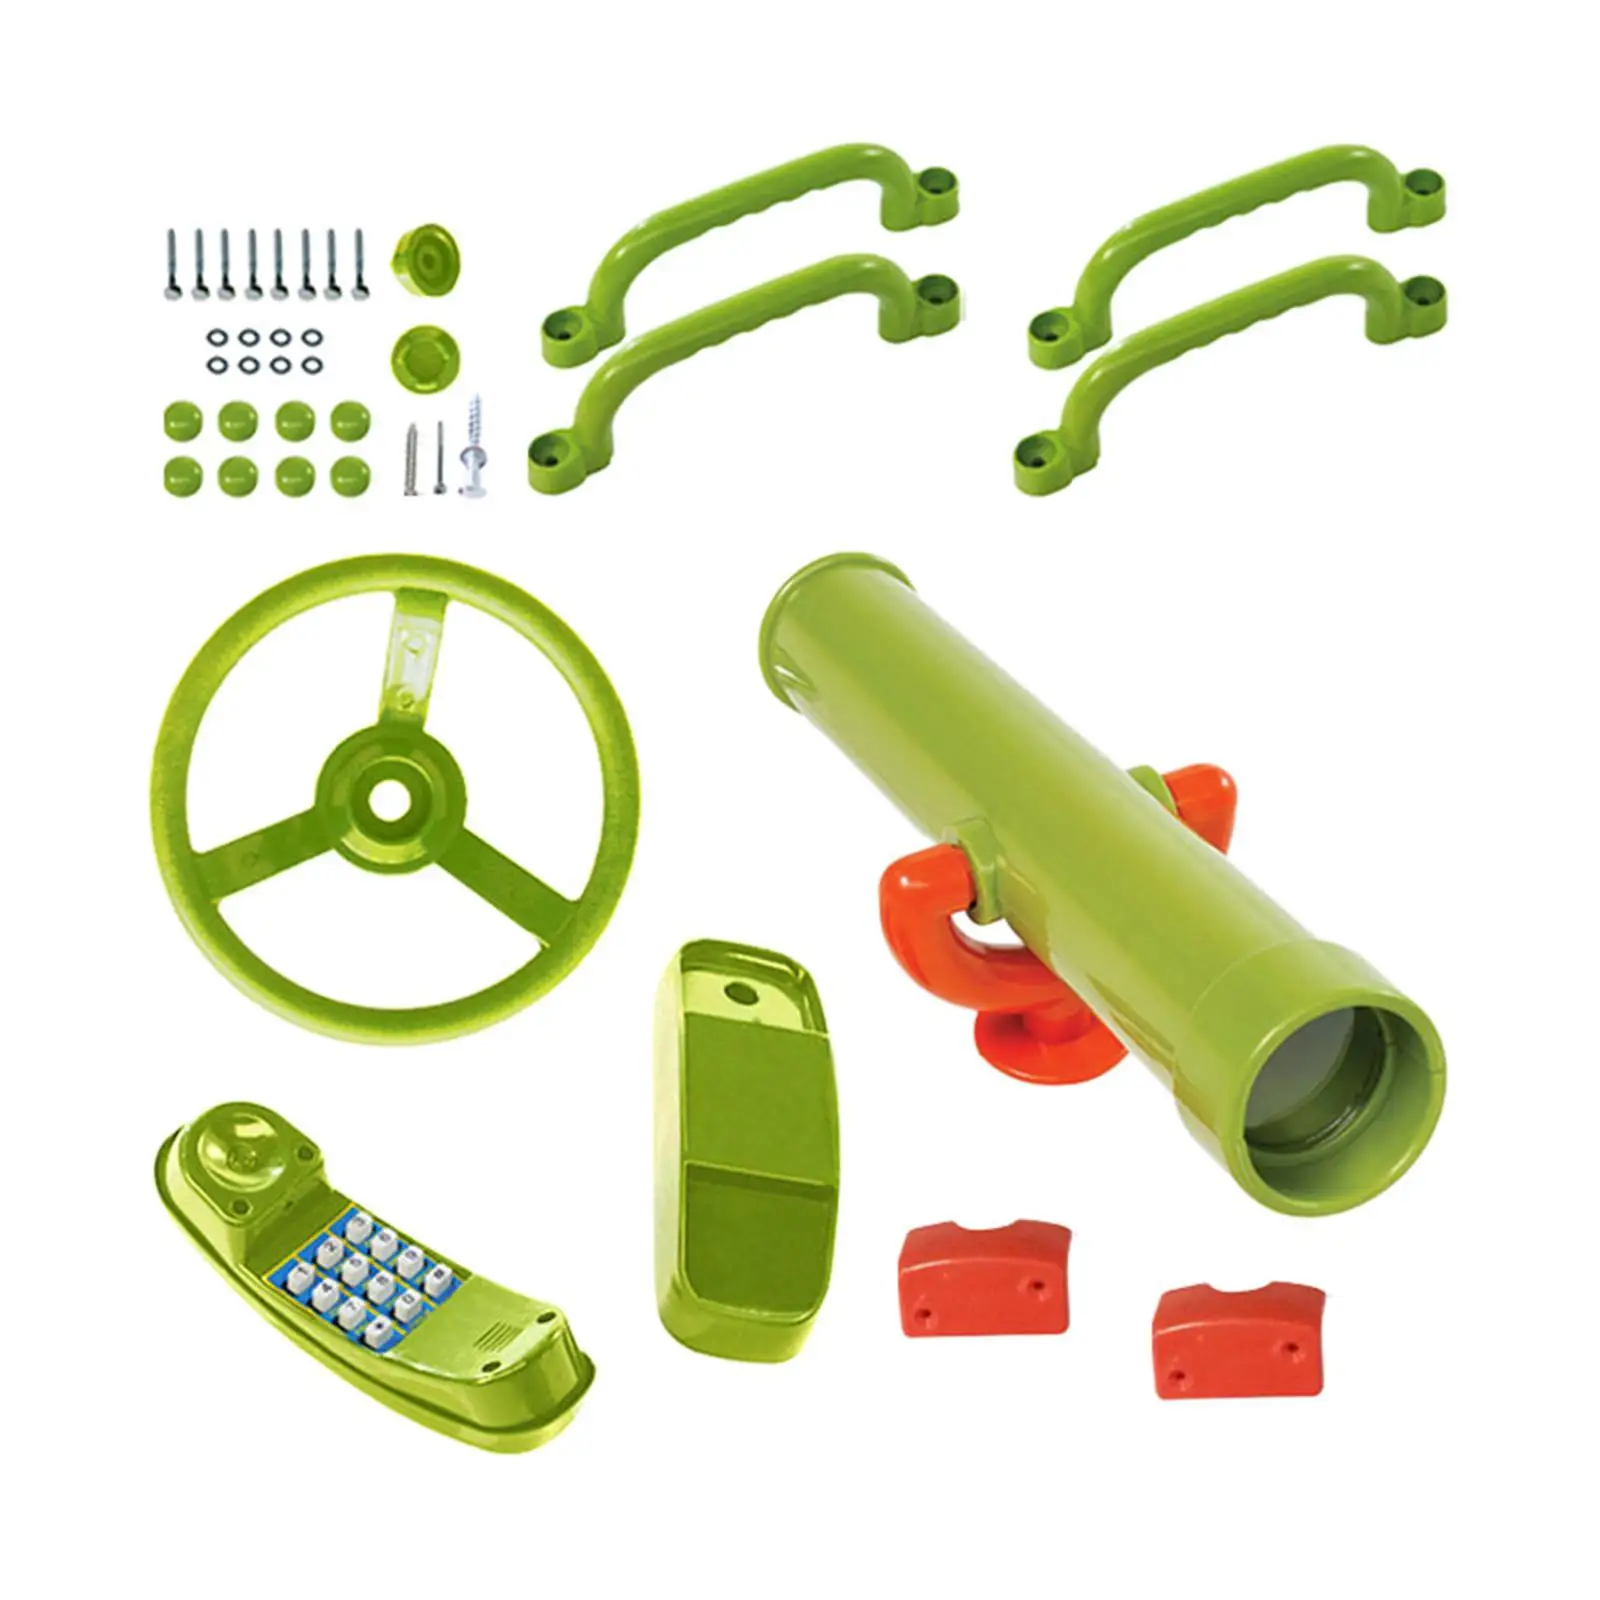 Playground Steering Wheel Set Toy Phone Swing Set Attachments for Backyard Play House Tree House Jungle Gym Birthday Gifts